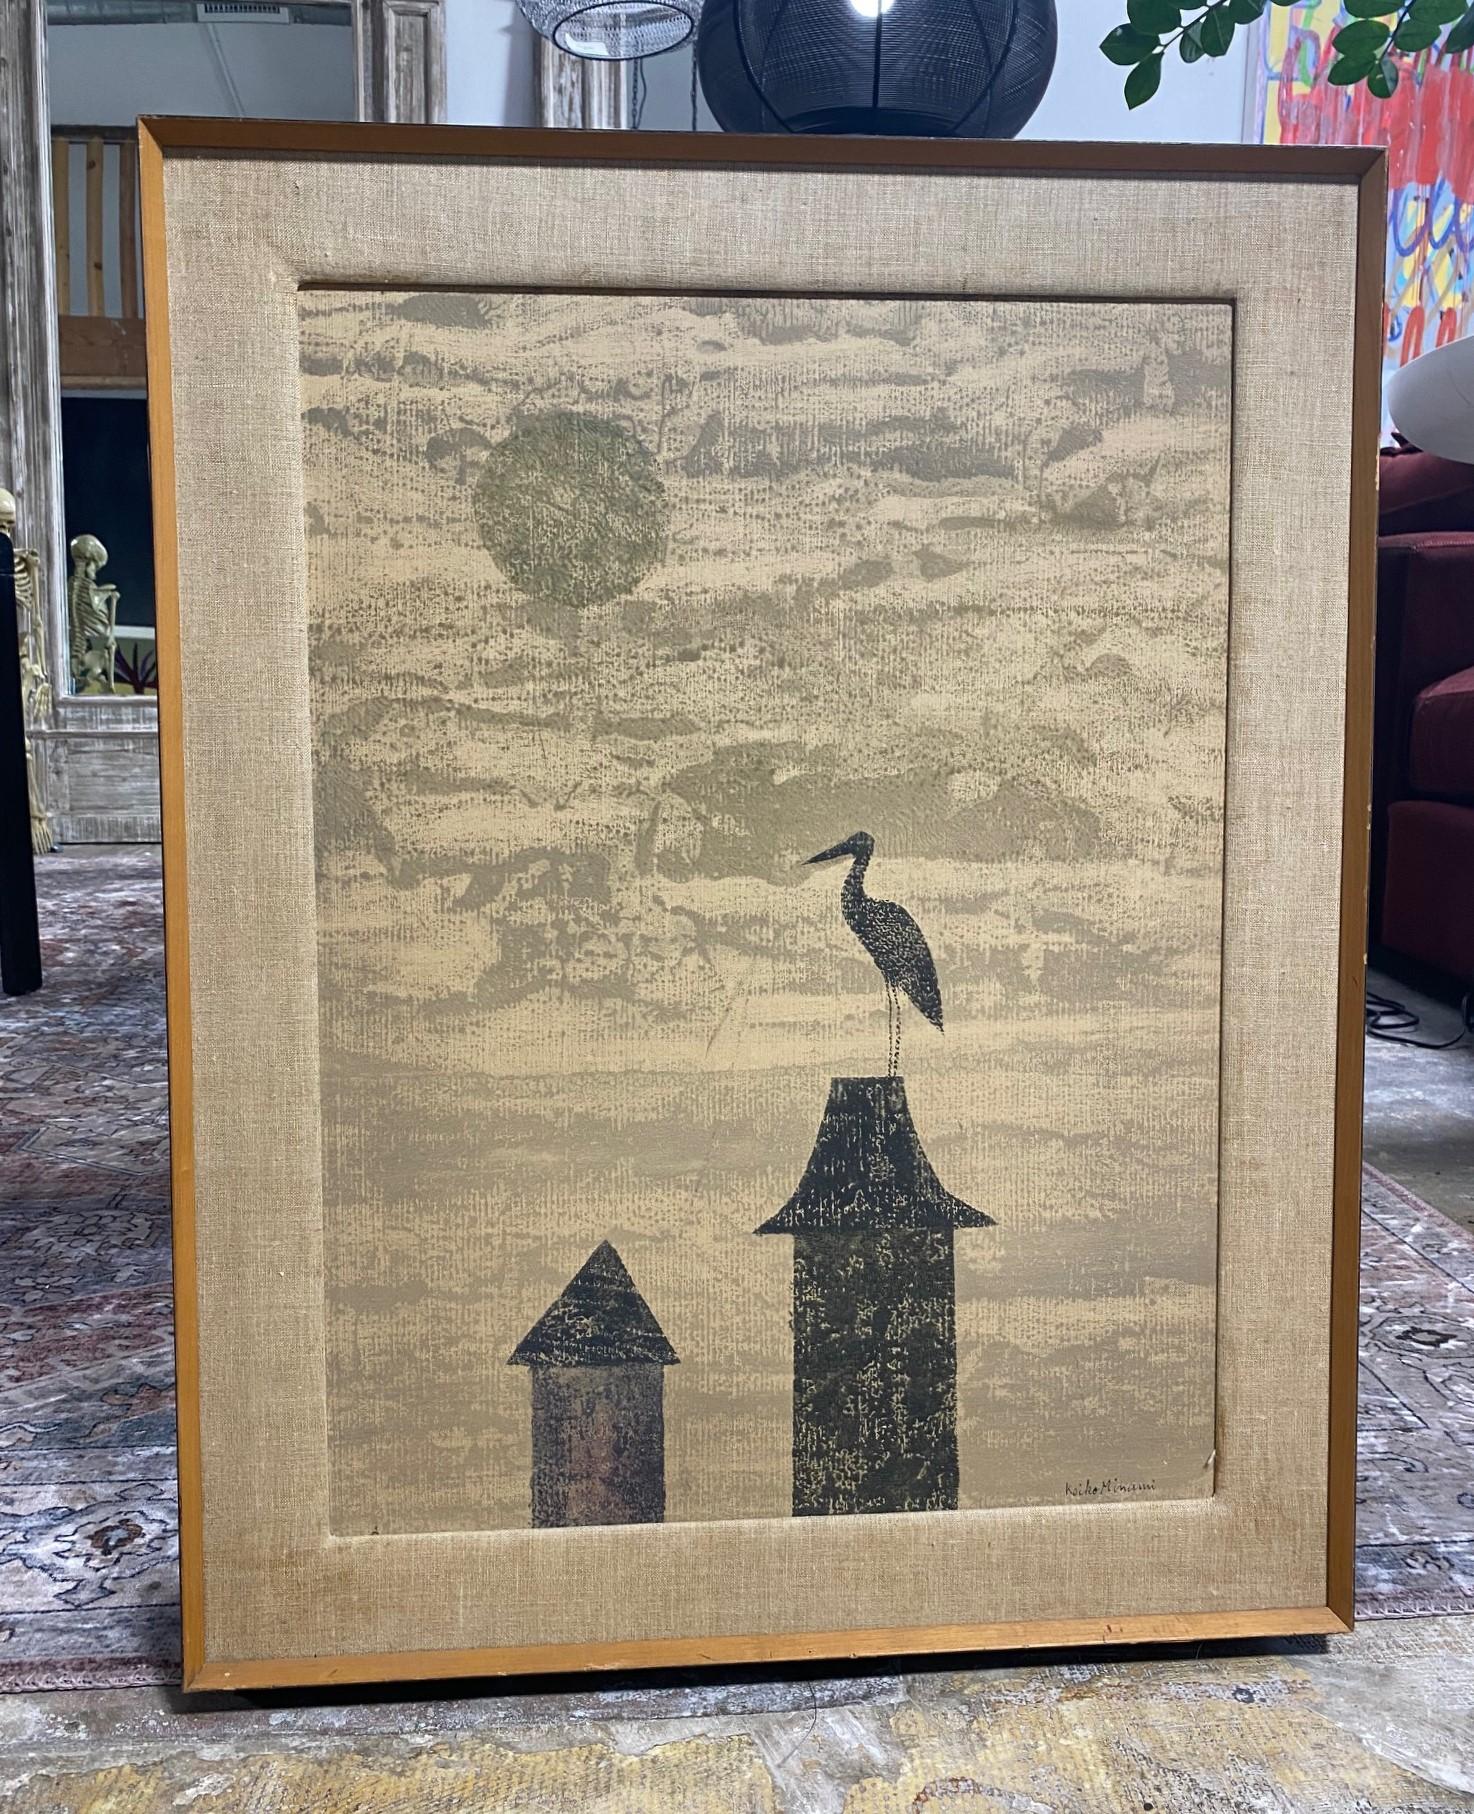 A wonderful and rather beautiful work by famed Japanese artist Keiko Minami who was known for her pictograph-like aquatints with a whimsical, childlike aesthetic. This work features a bird - perhaps a crane - sitting serenely on top of a rooftop